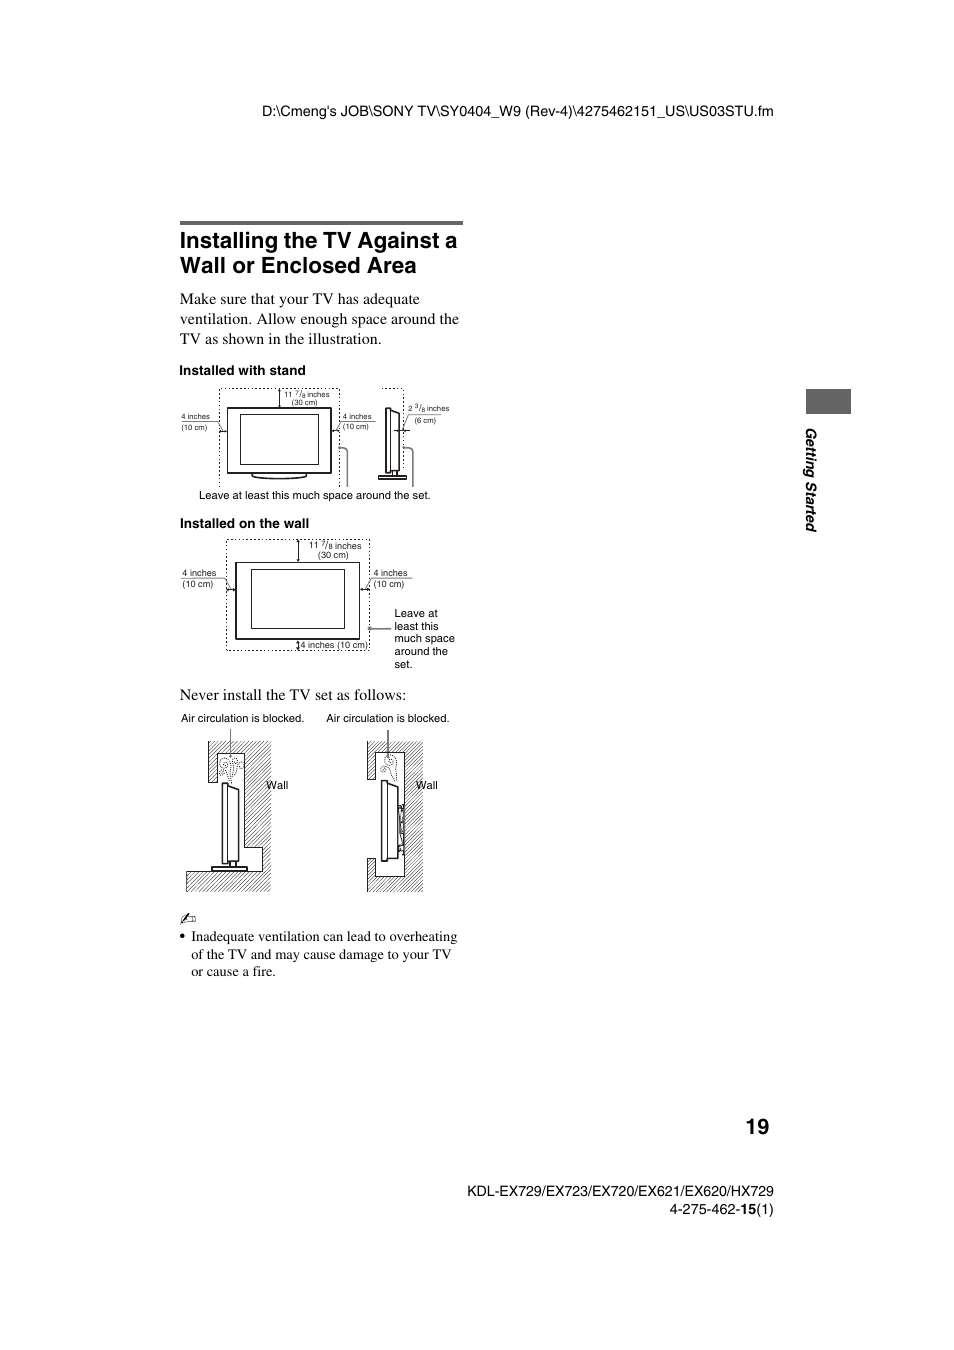 Installing the tv against a wall or enclosed area, Never install the tv set as follows | Sony KDL-46EX621 User Manual | Page 19 / 36